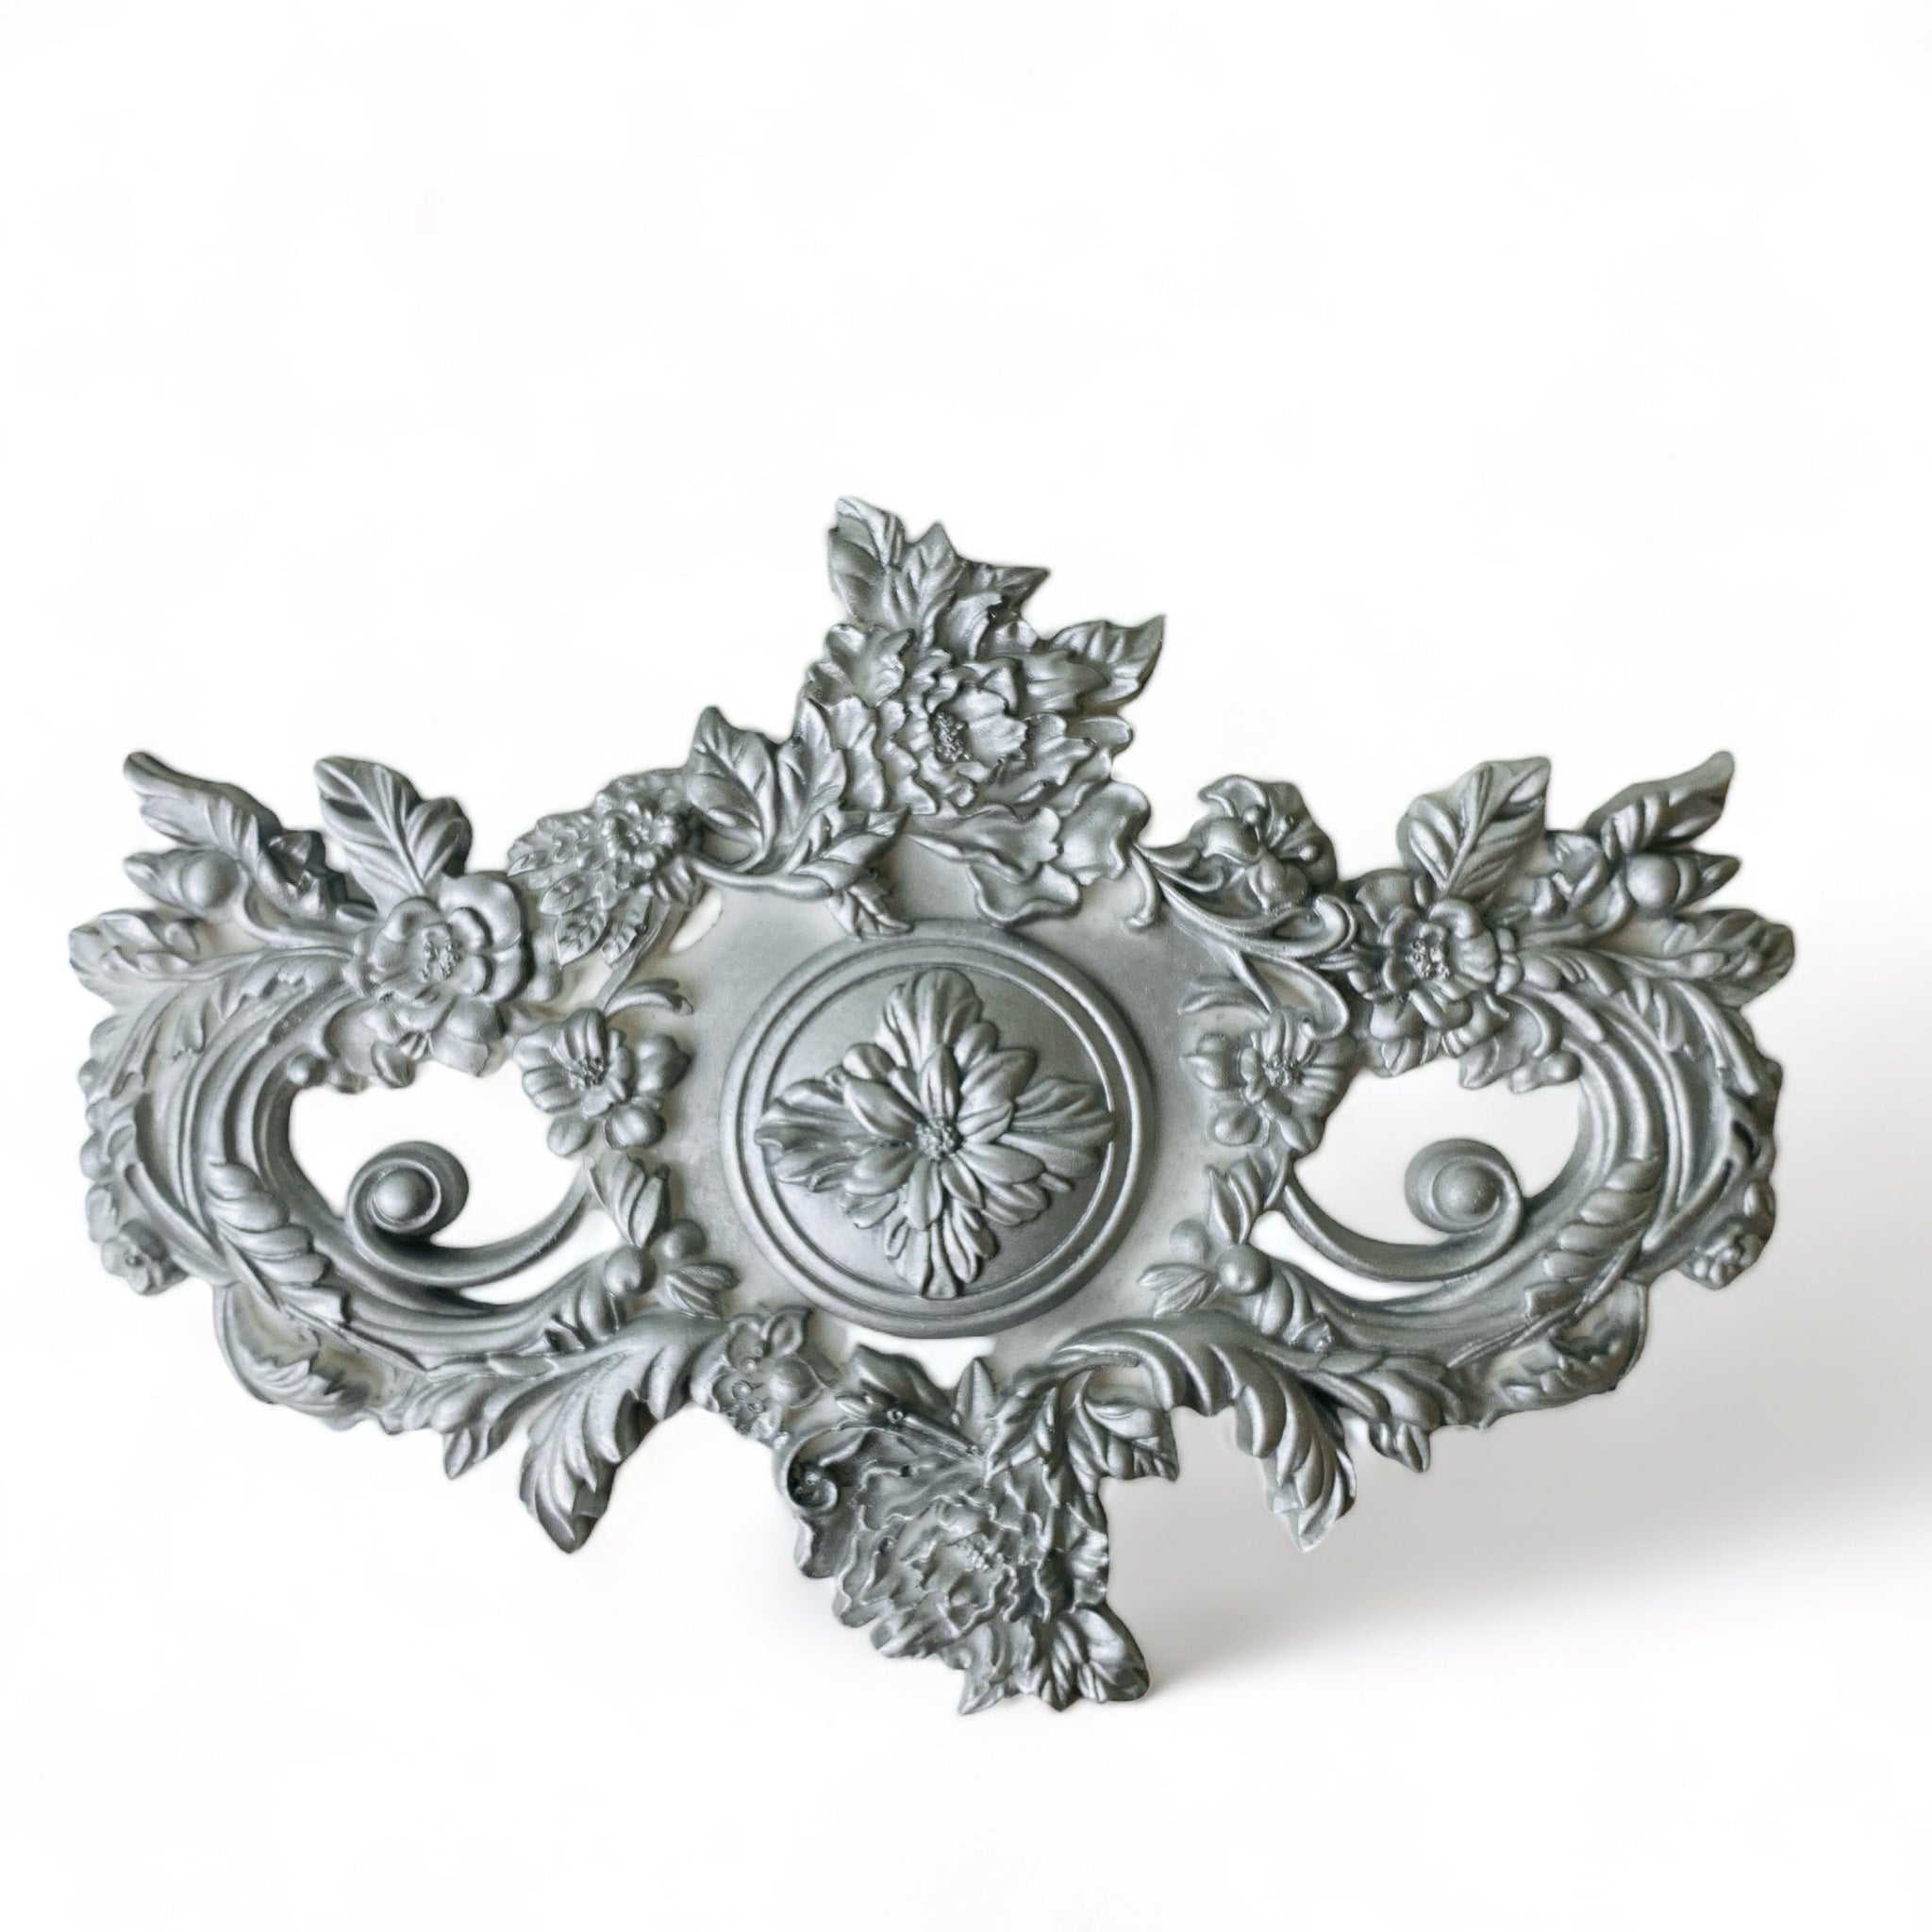 A silver-colored silicone mold casting of a large ornate floral accented medallion center piece is against a white background.